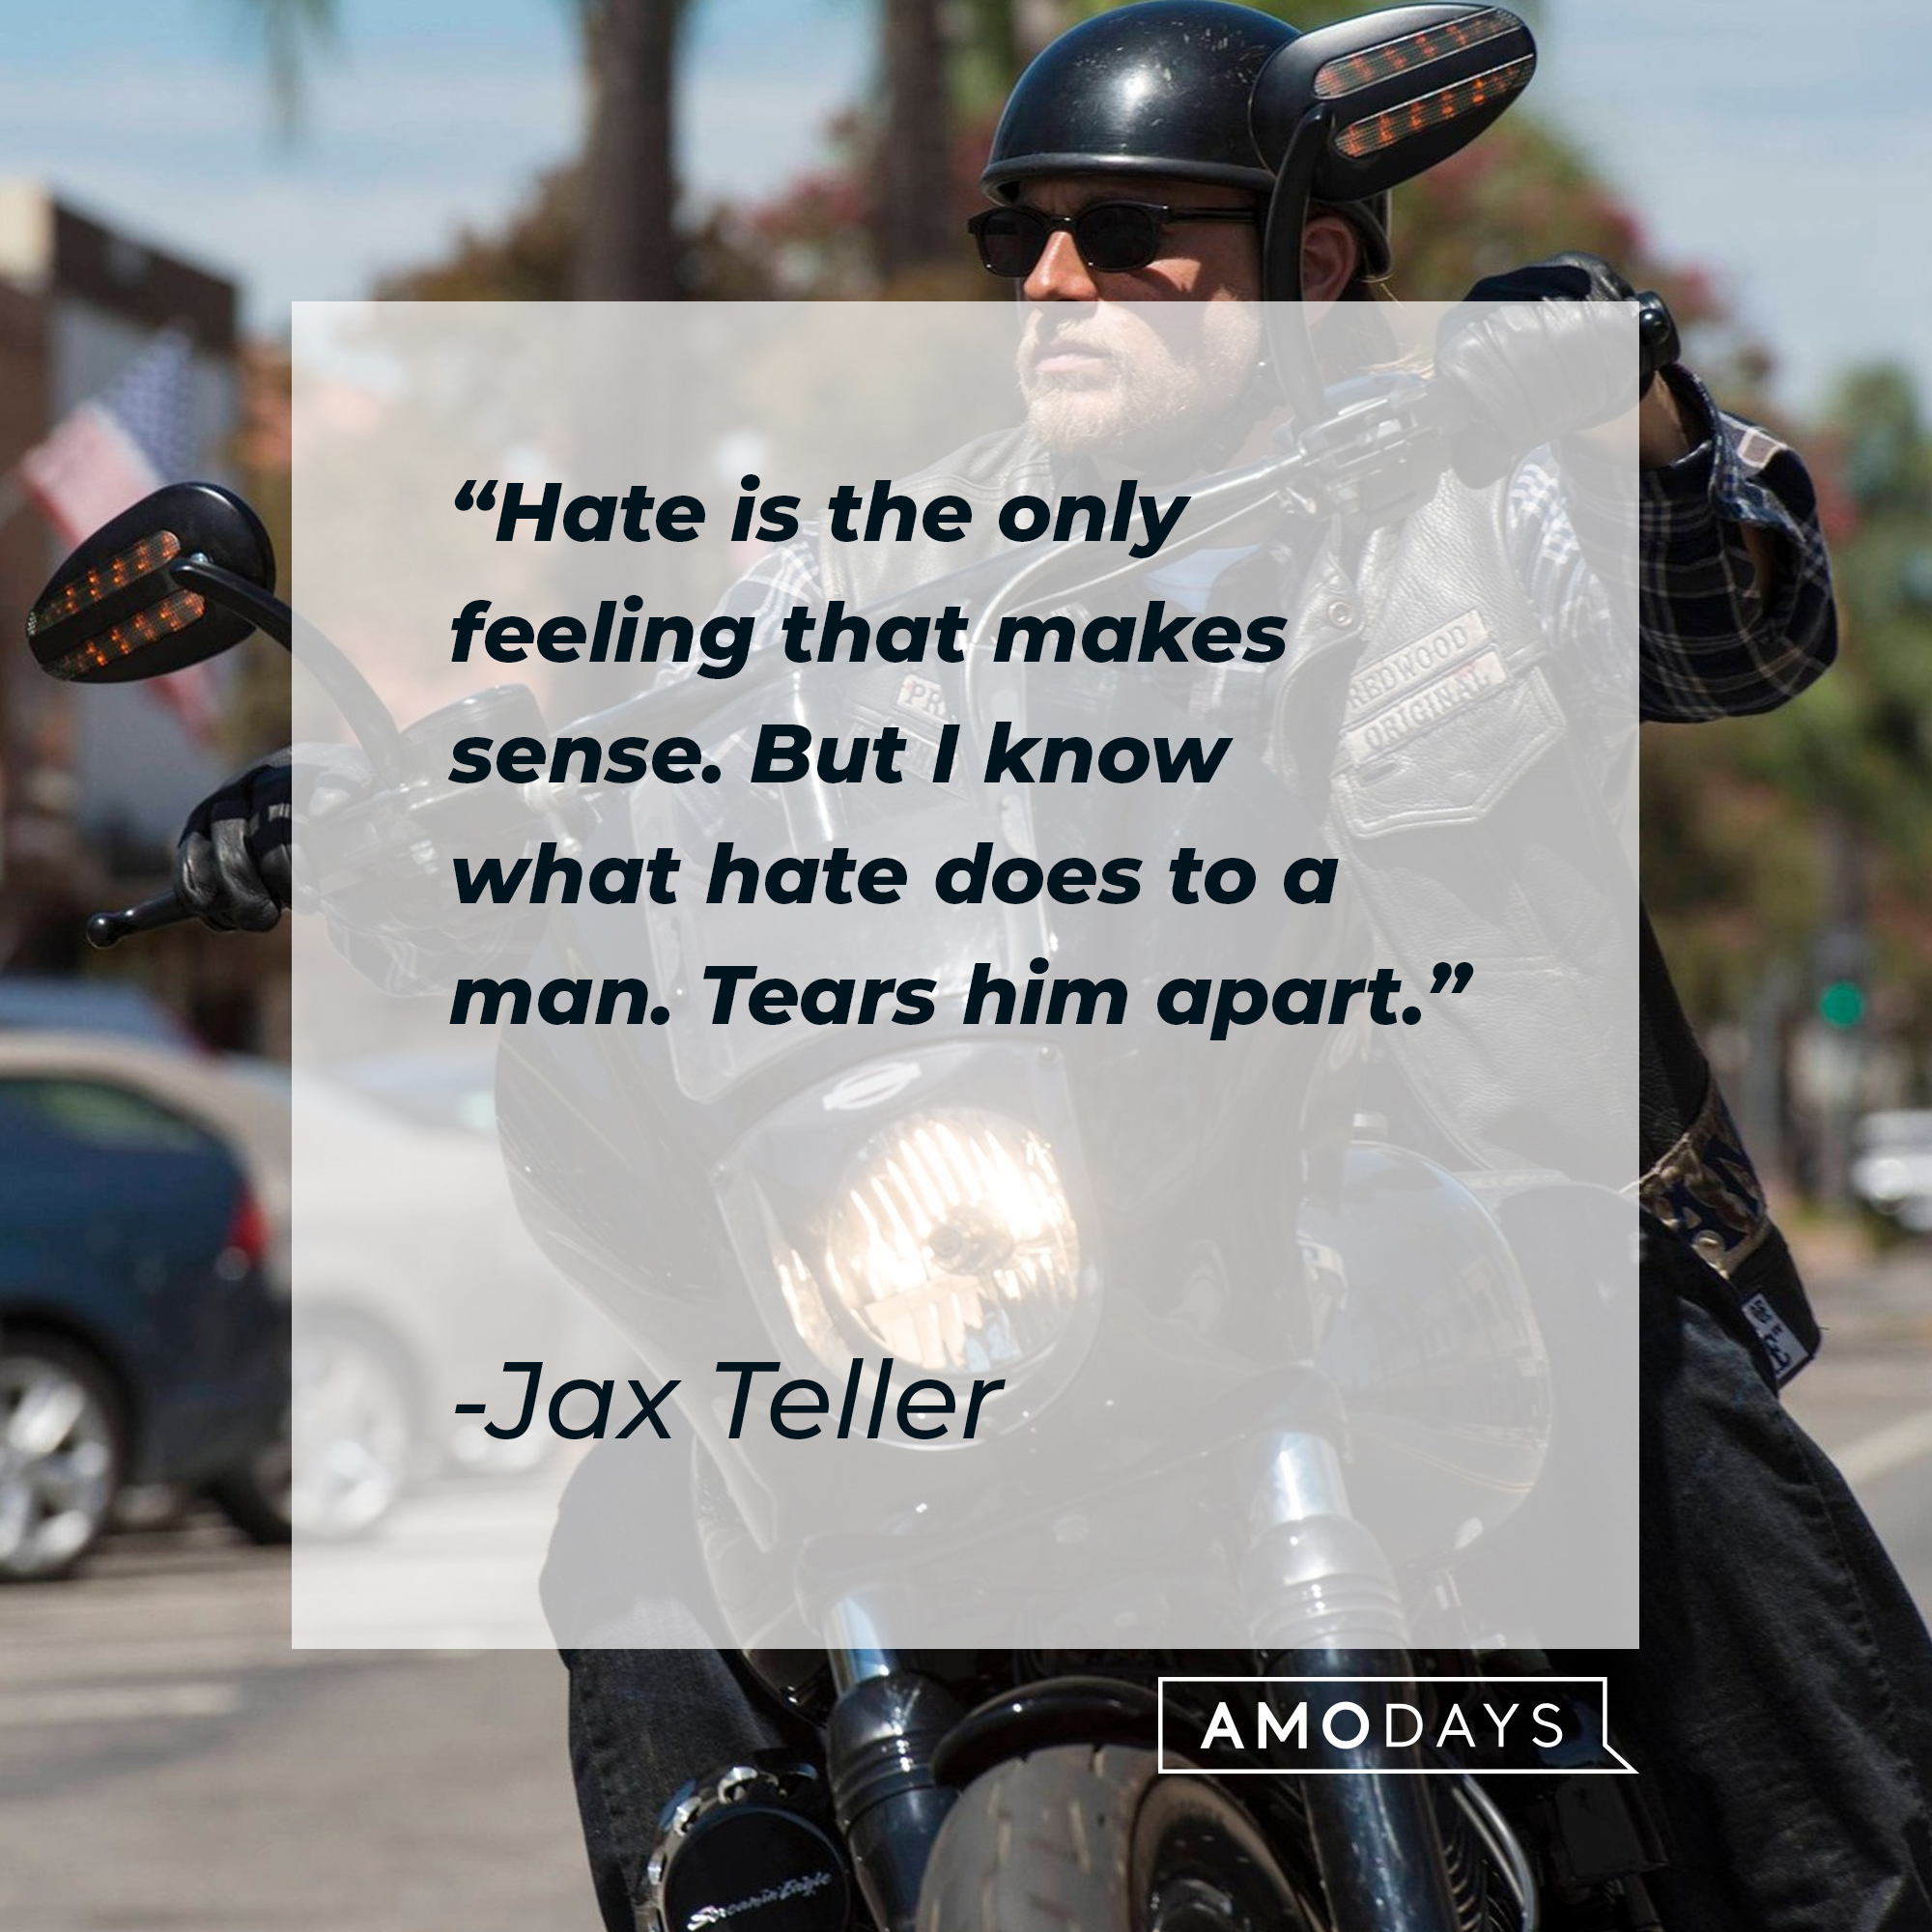 Jax Teller with his quote: "Hate is the only feeling that makes sense. But I know what hate does to a man. Tears him apart.” |  Source: facebook.com/SonsofAnarchy